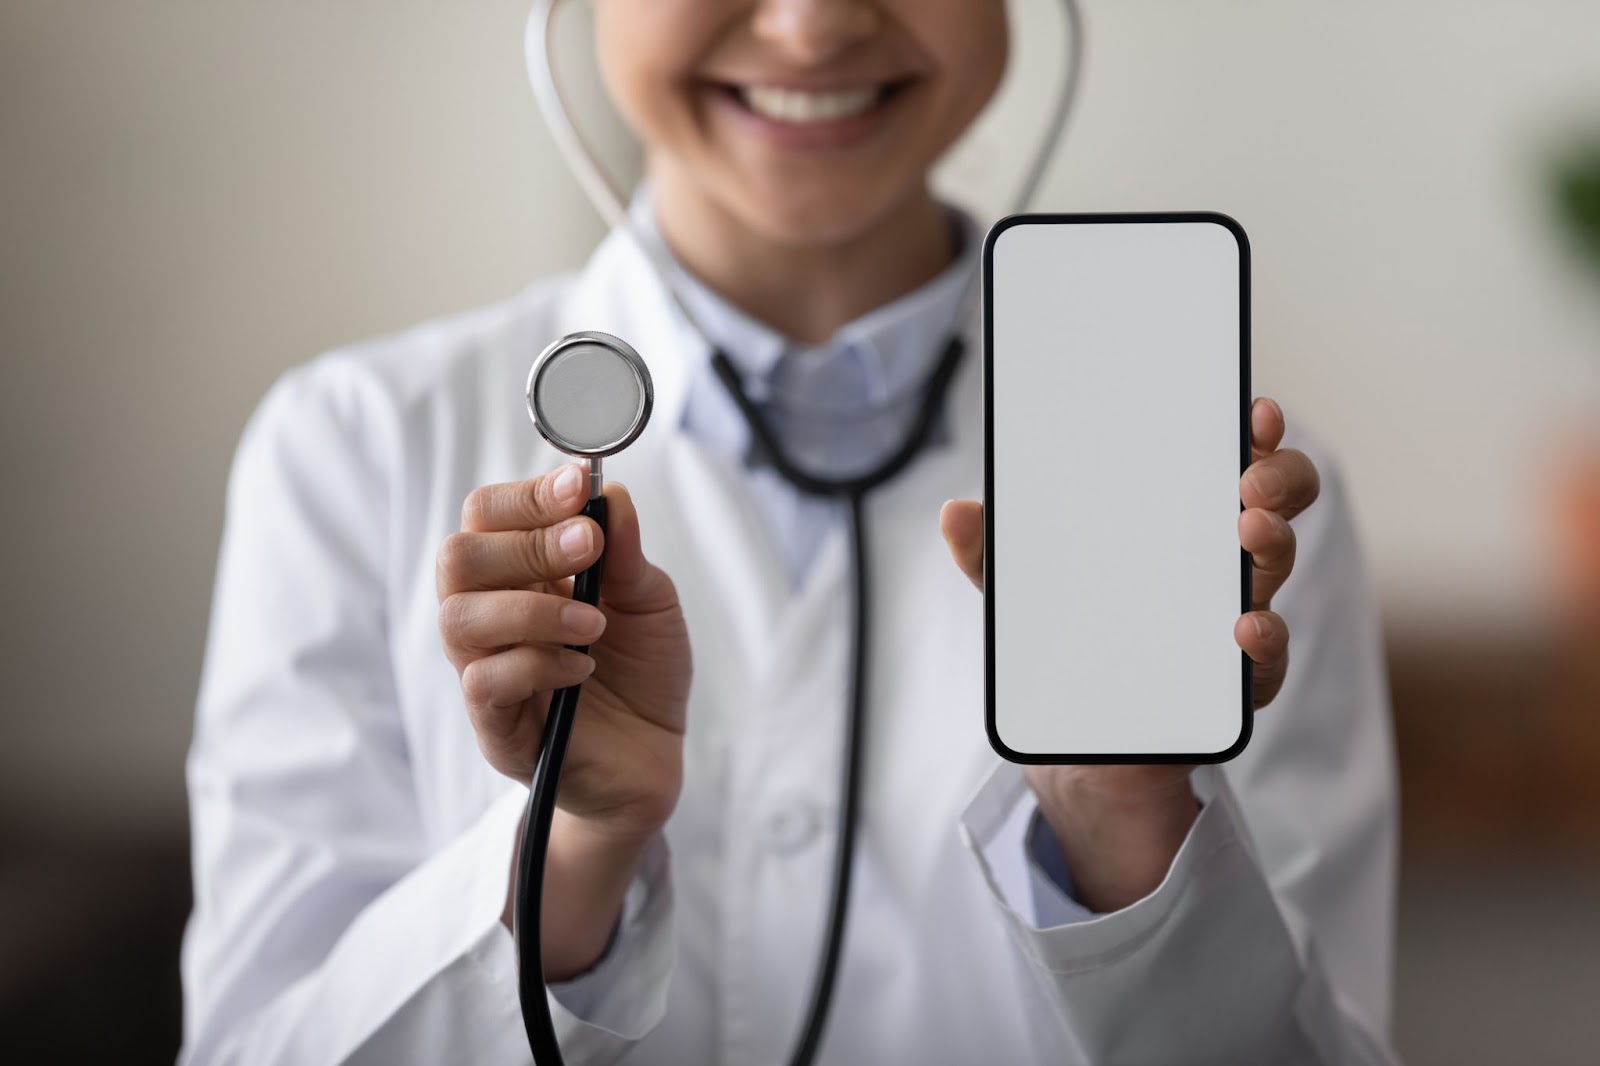 millenial physicians - stethoscope and cell phone